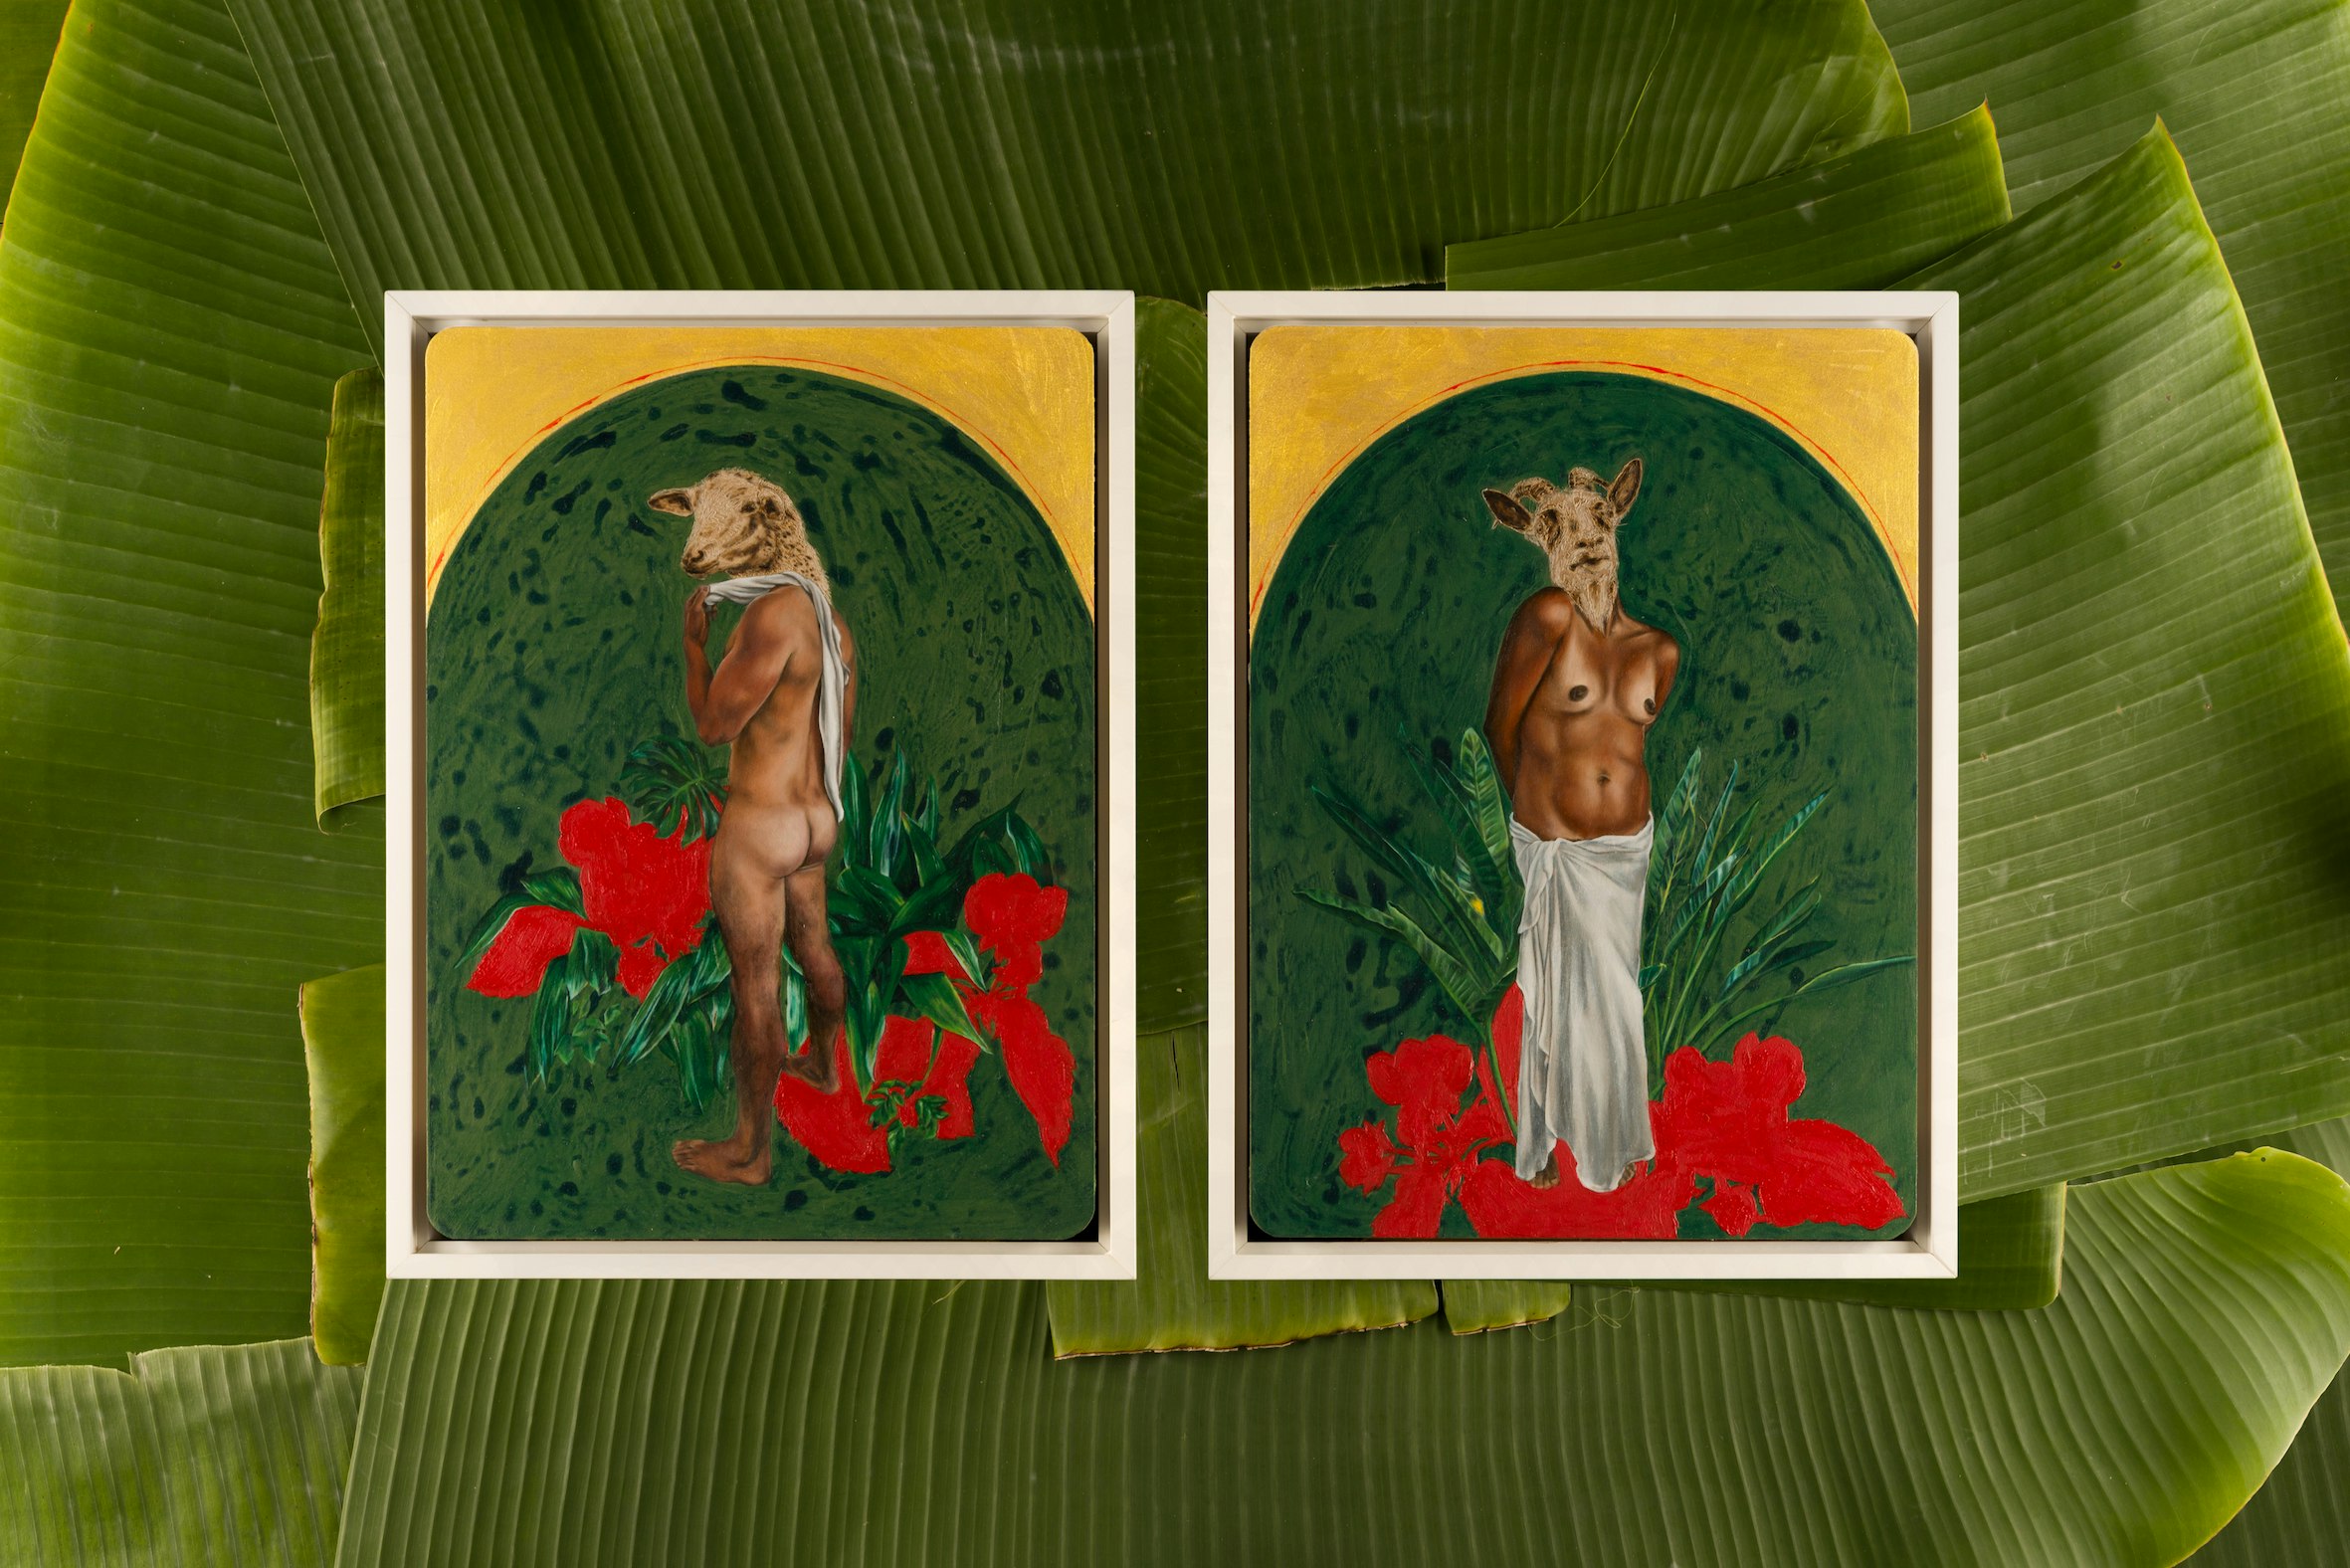 Two painted panels of two dark-skinned figures standing against a green backdrop, wearing animal masks resembling a sheep and a ewe. One of them looks over their shoulder while the other looks directly at us.